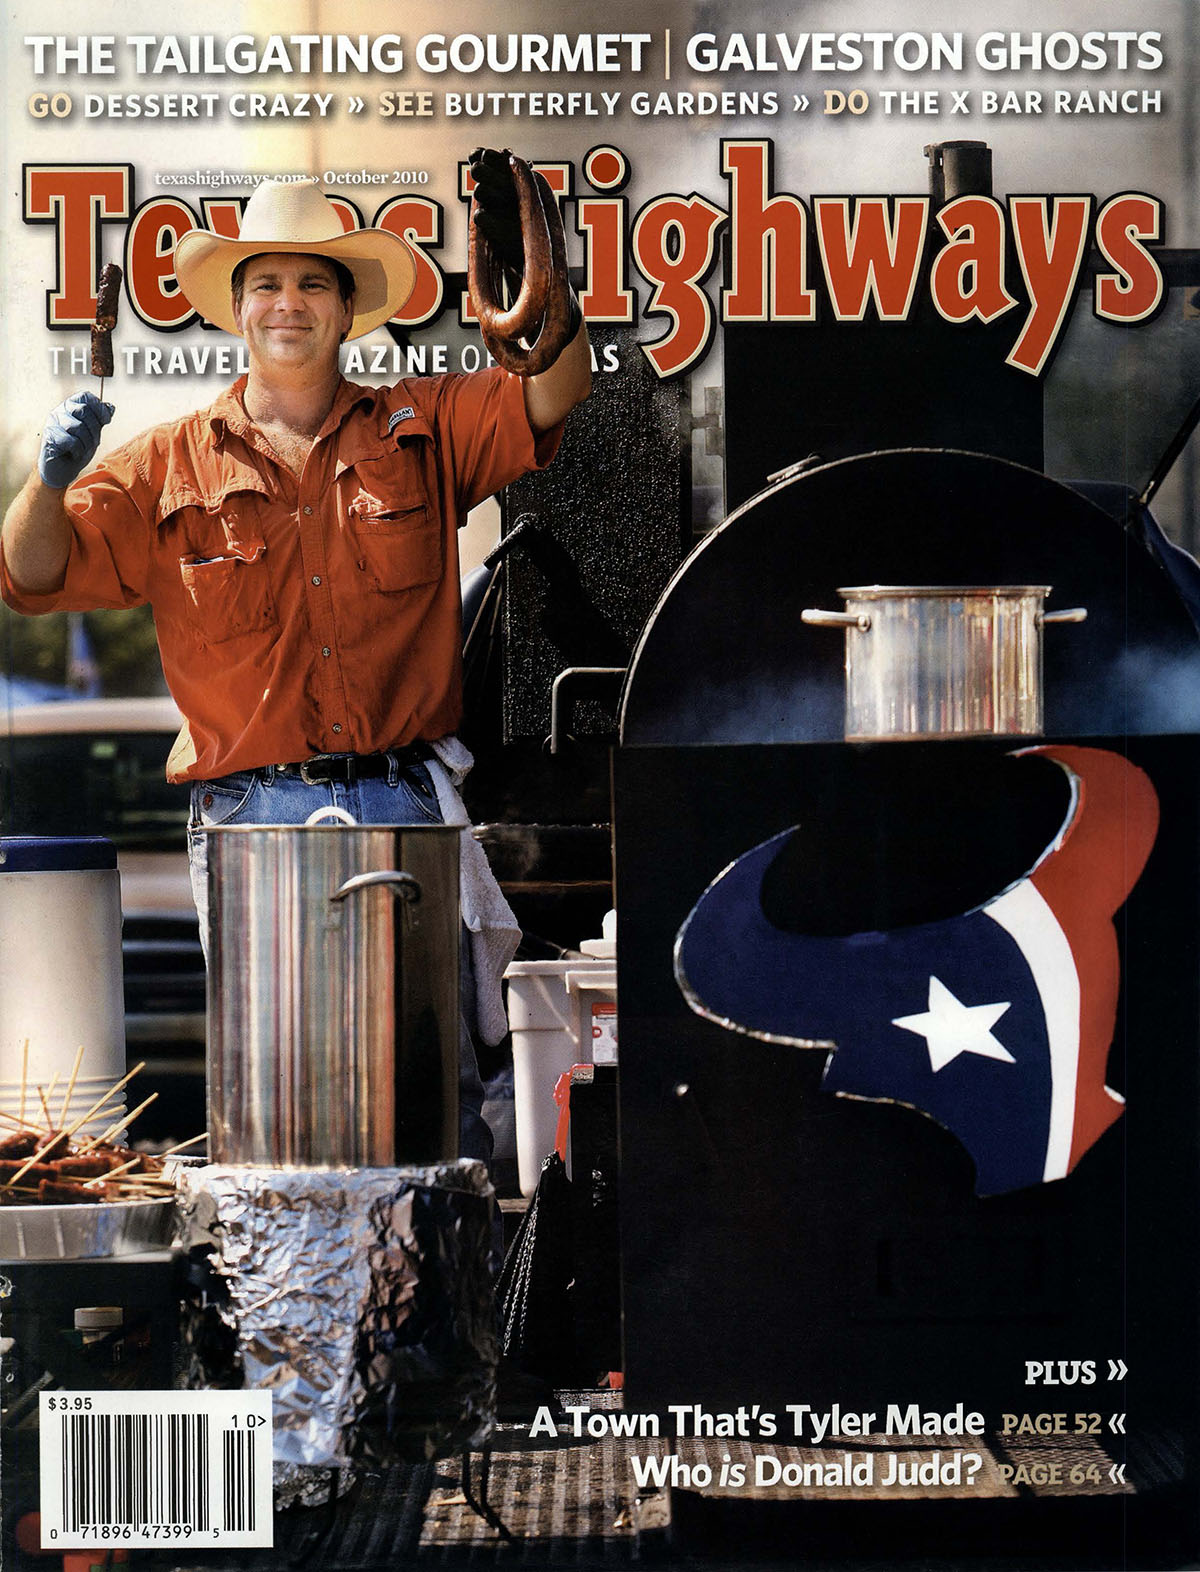 The October 2010 cover of Texas Highways Magazine